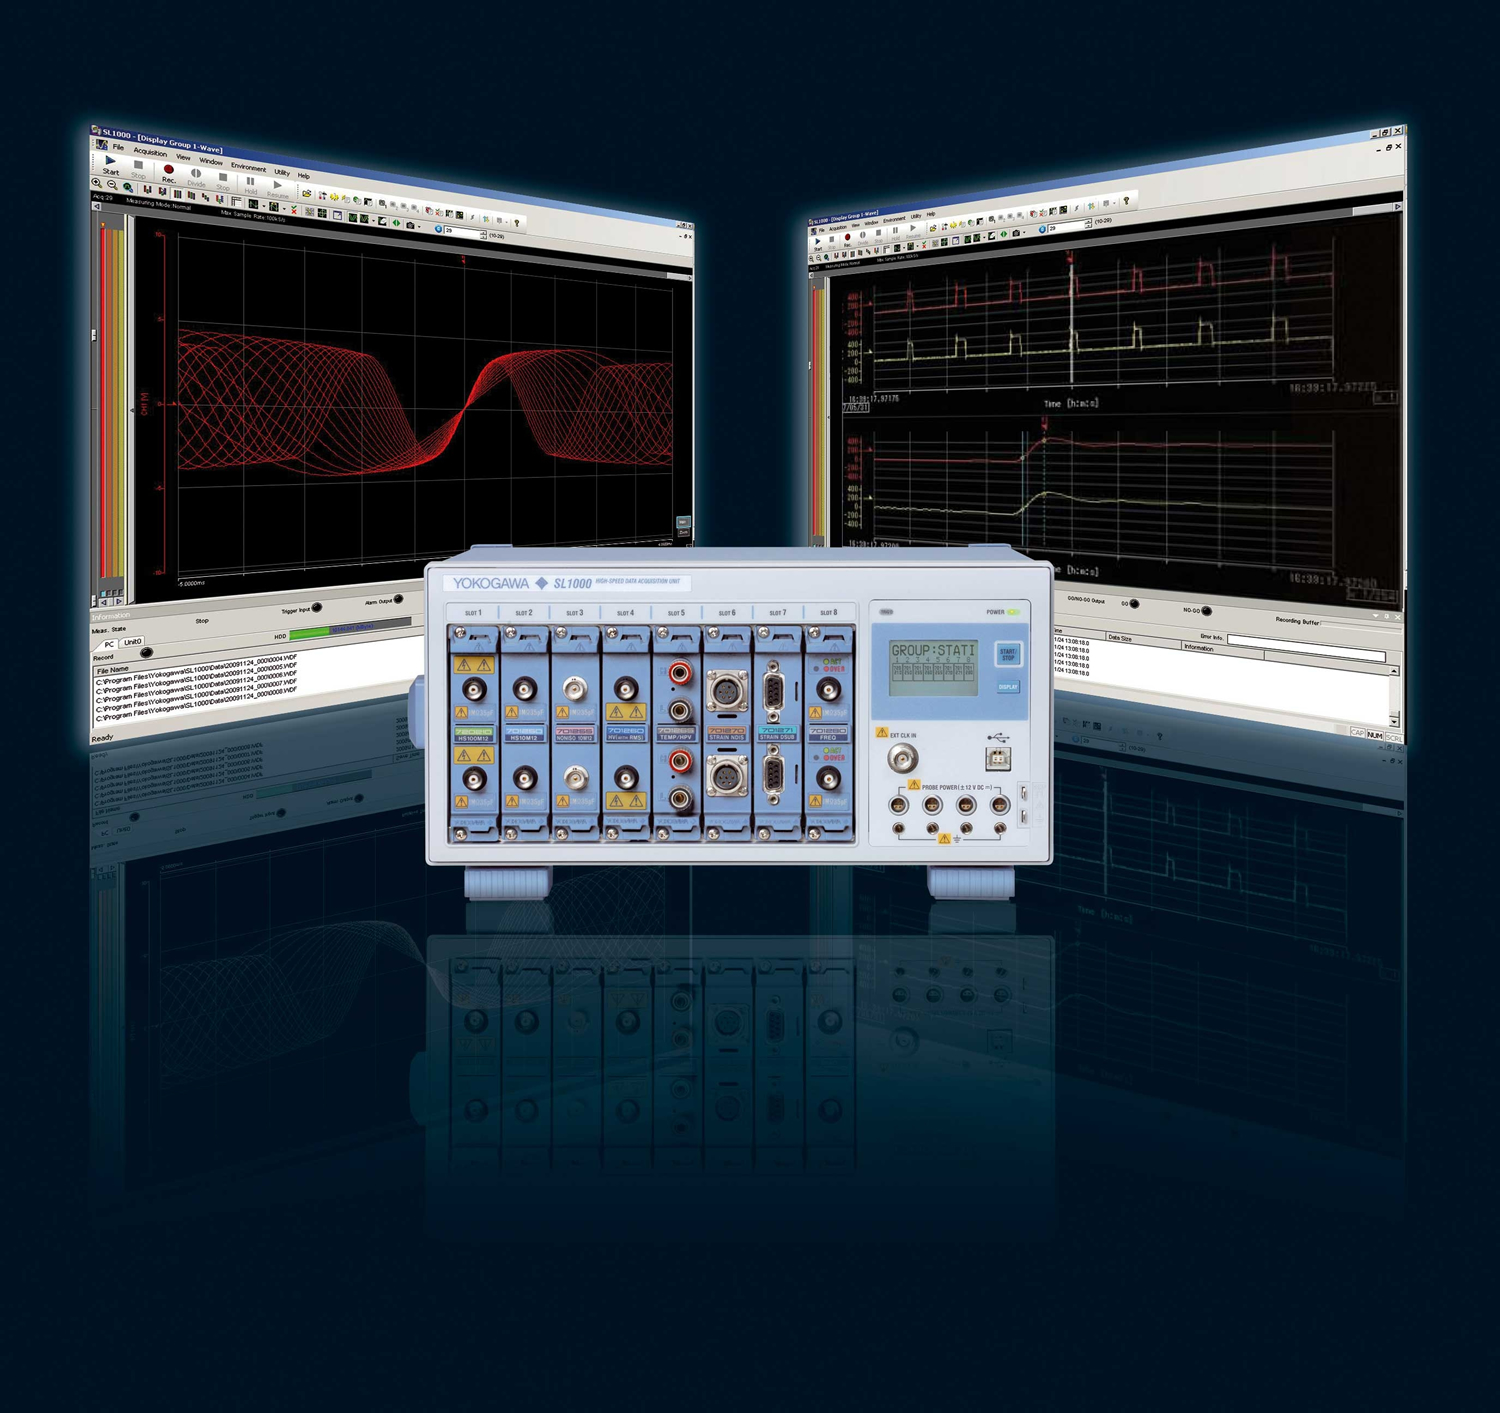 Yokogawa software update for high-speed data-acquisition system